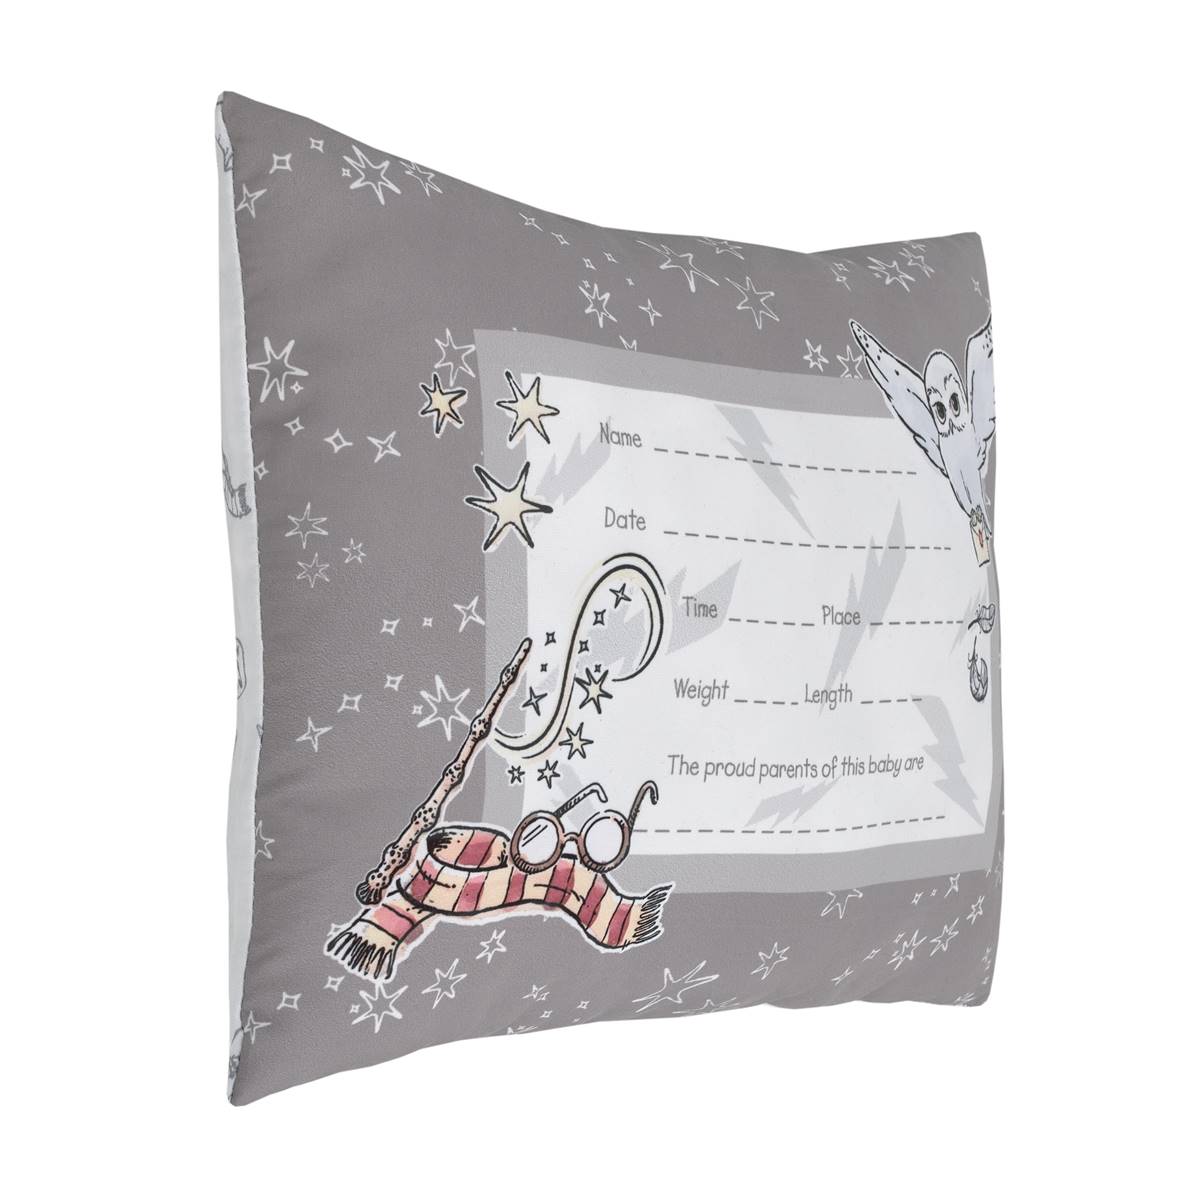 Warner Bros. Harry Potter Magical Moments Pillow - 8x11